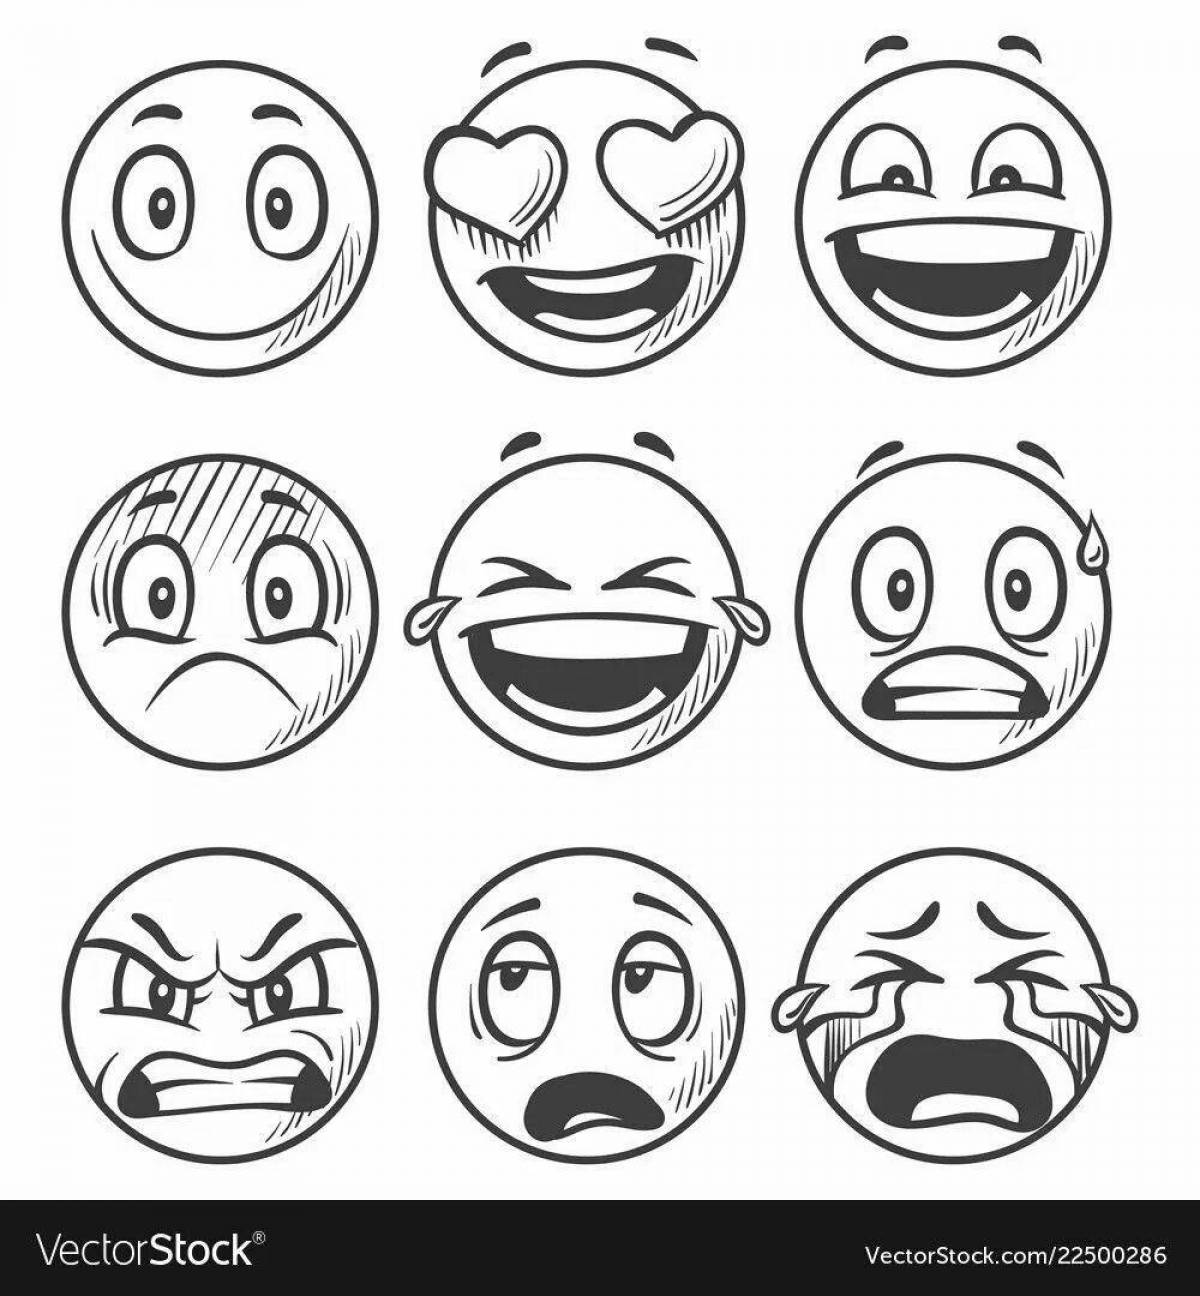 Embarrassed smiley coloring page